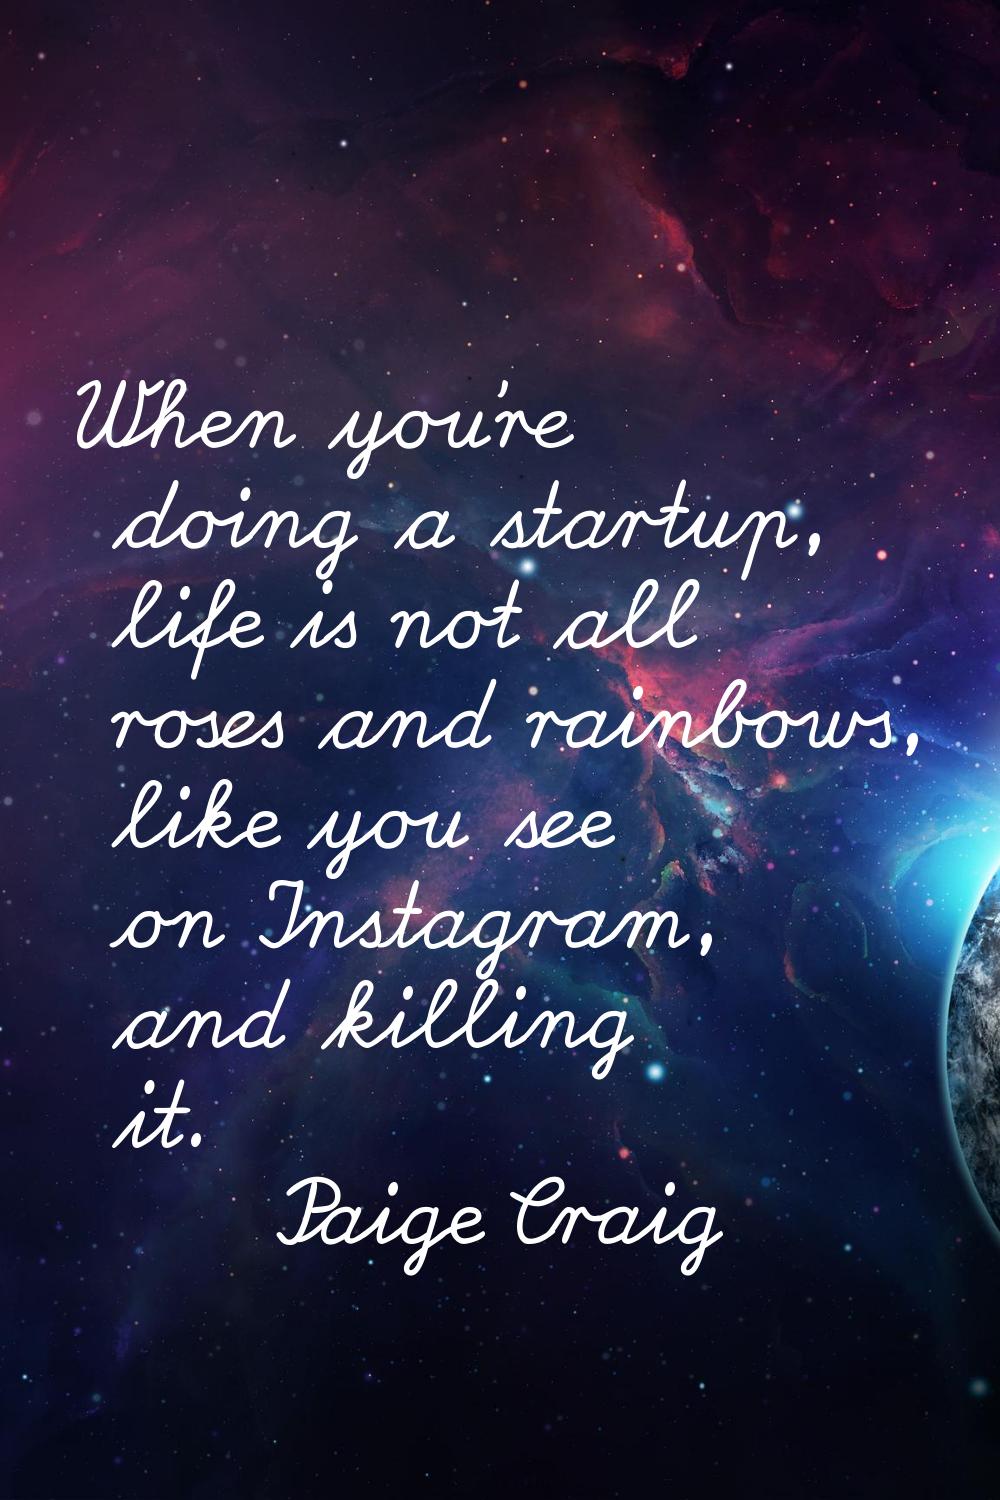 When you're doing a startup, life is not all roses and rainbows, like you see on Instagram, and kil